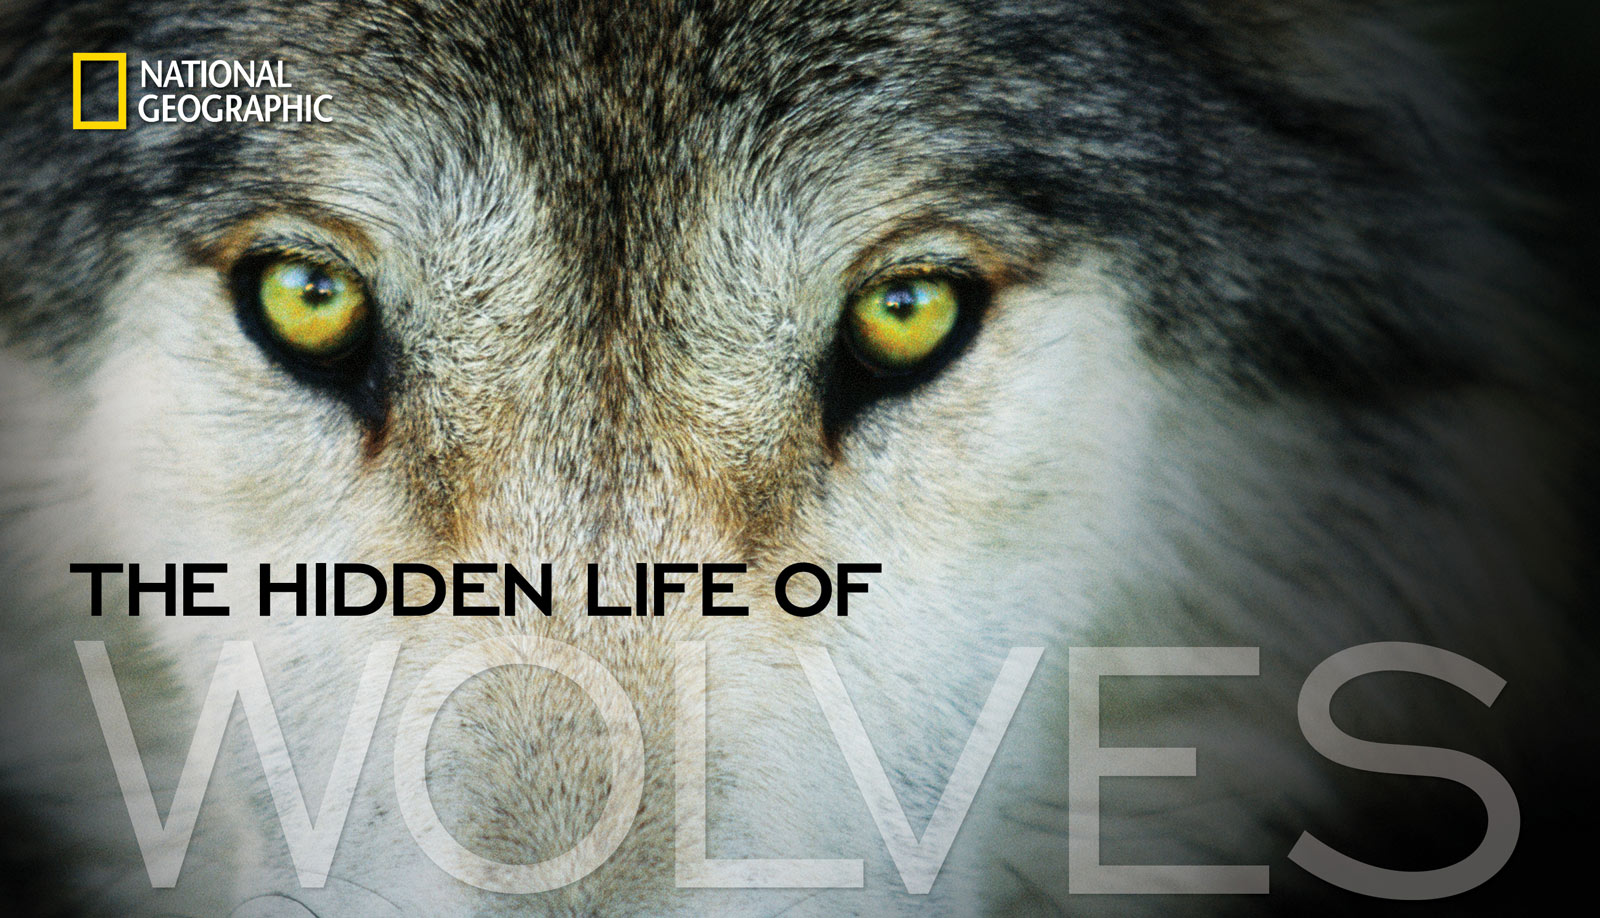 By providing over 40,000 readers with vital information through our National Geographic book, The Hidden Life of Wolves.